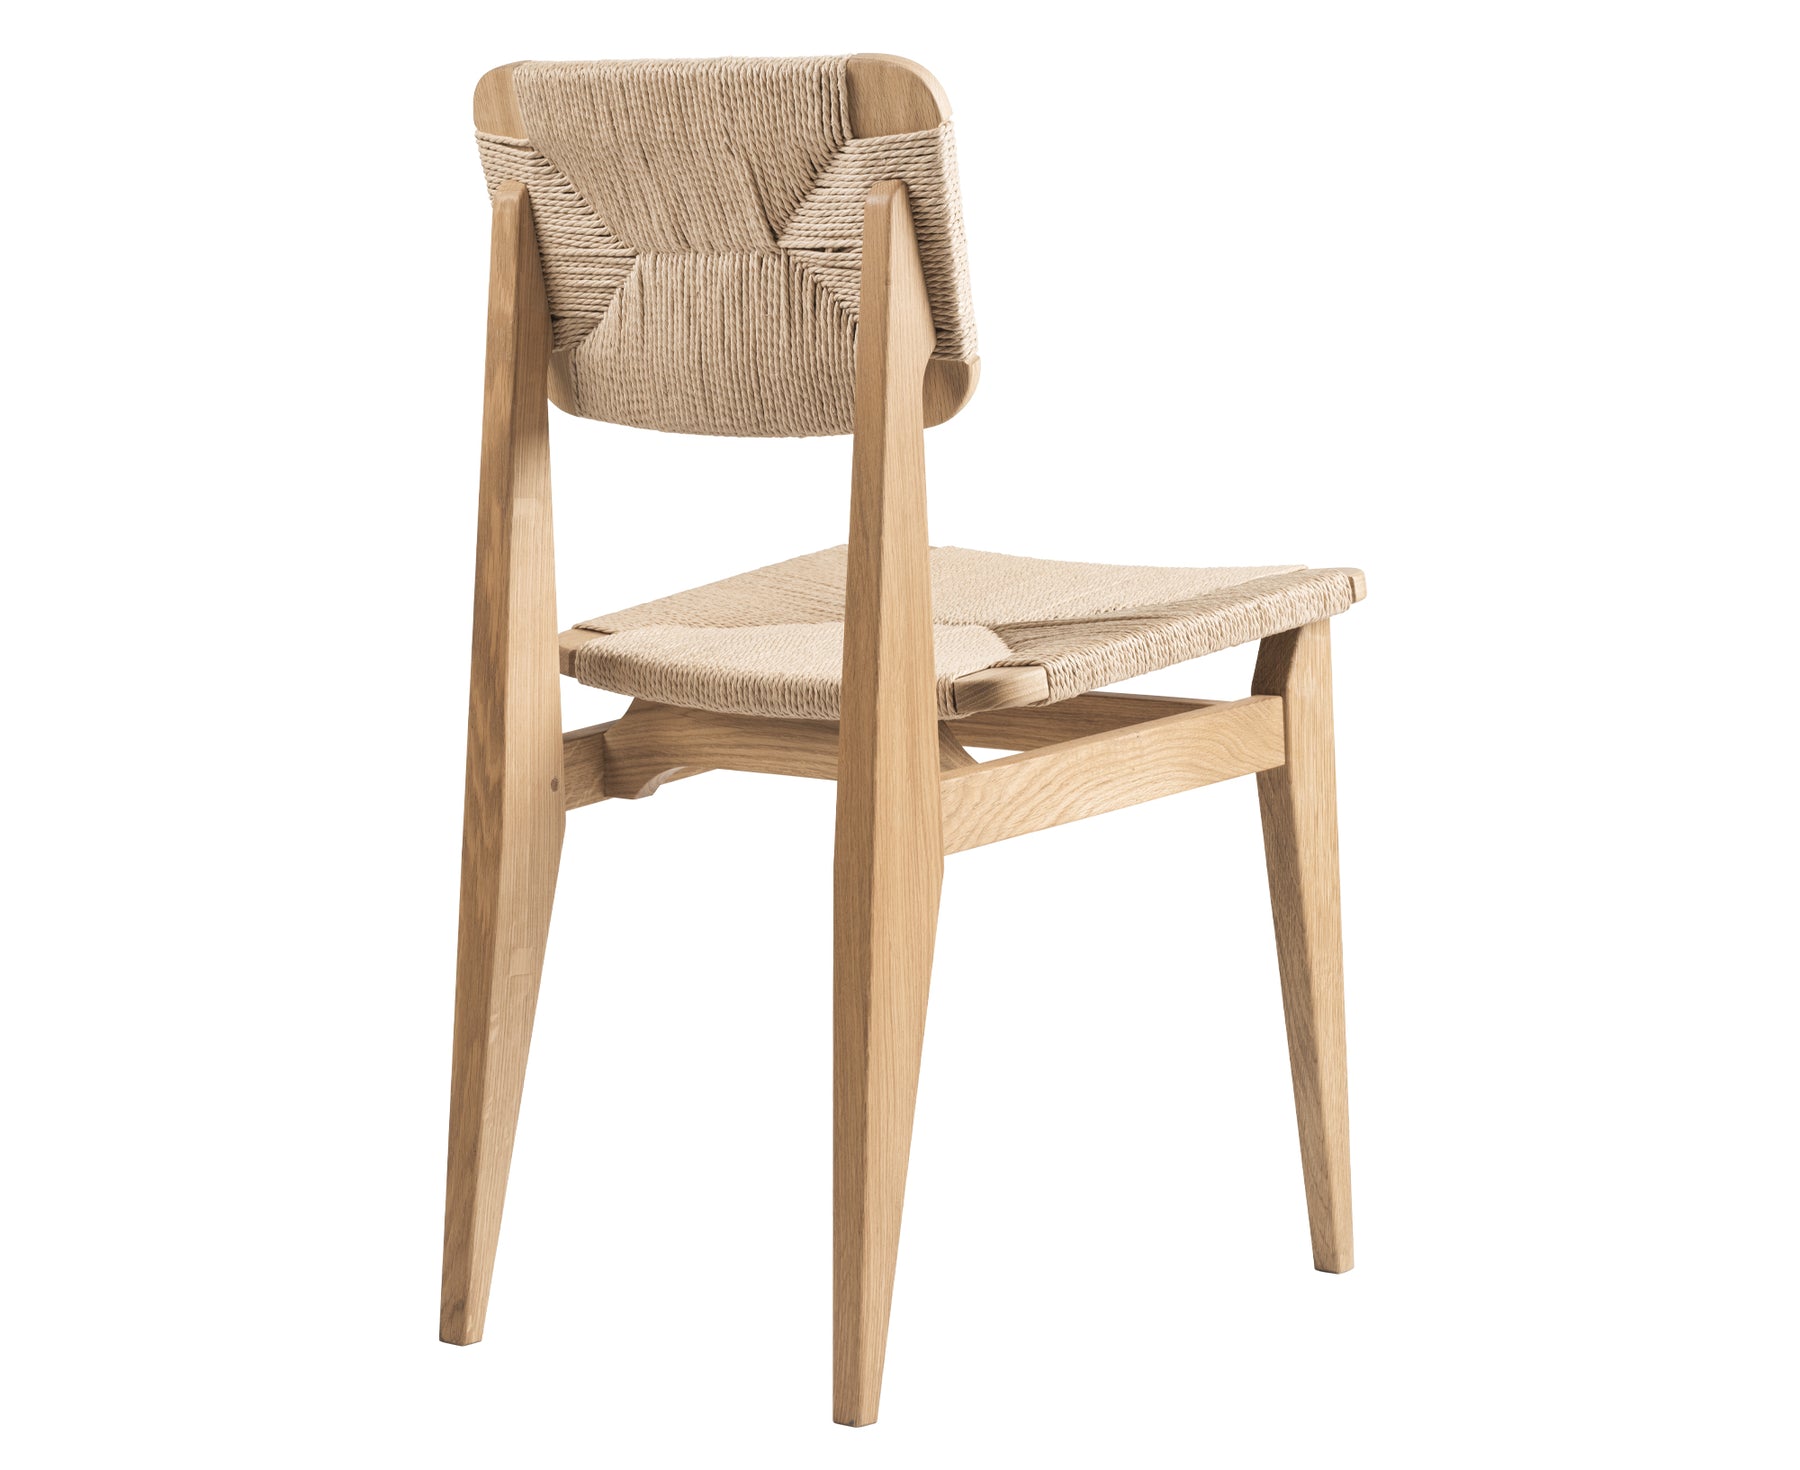 Woven Paper Cord Dining Chair | DSHOP